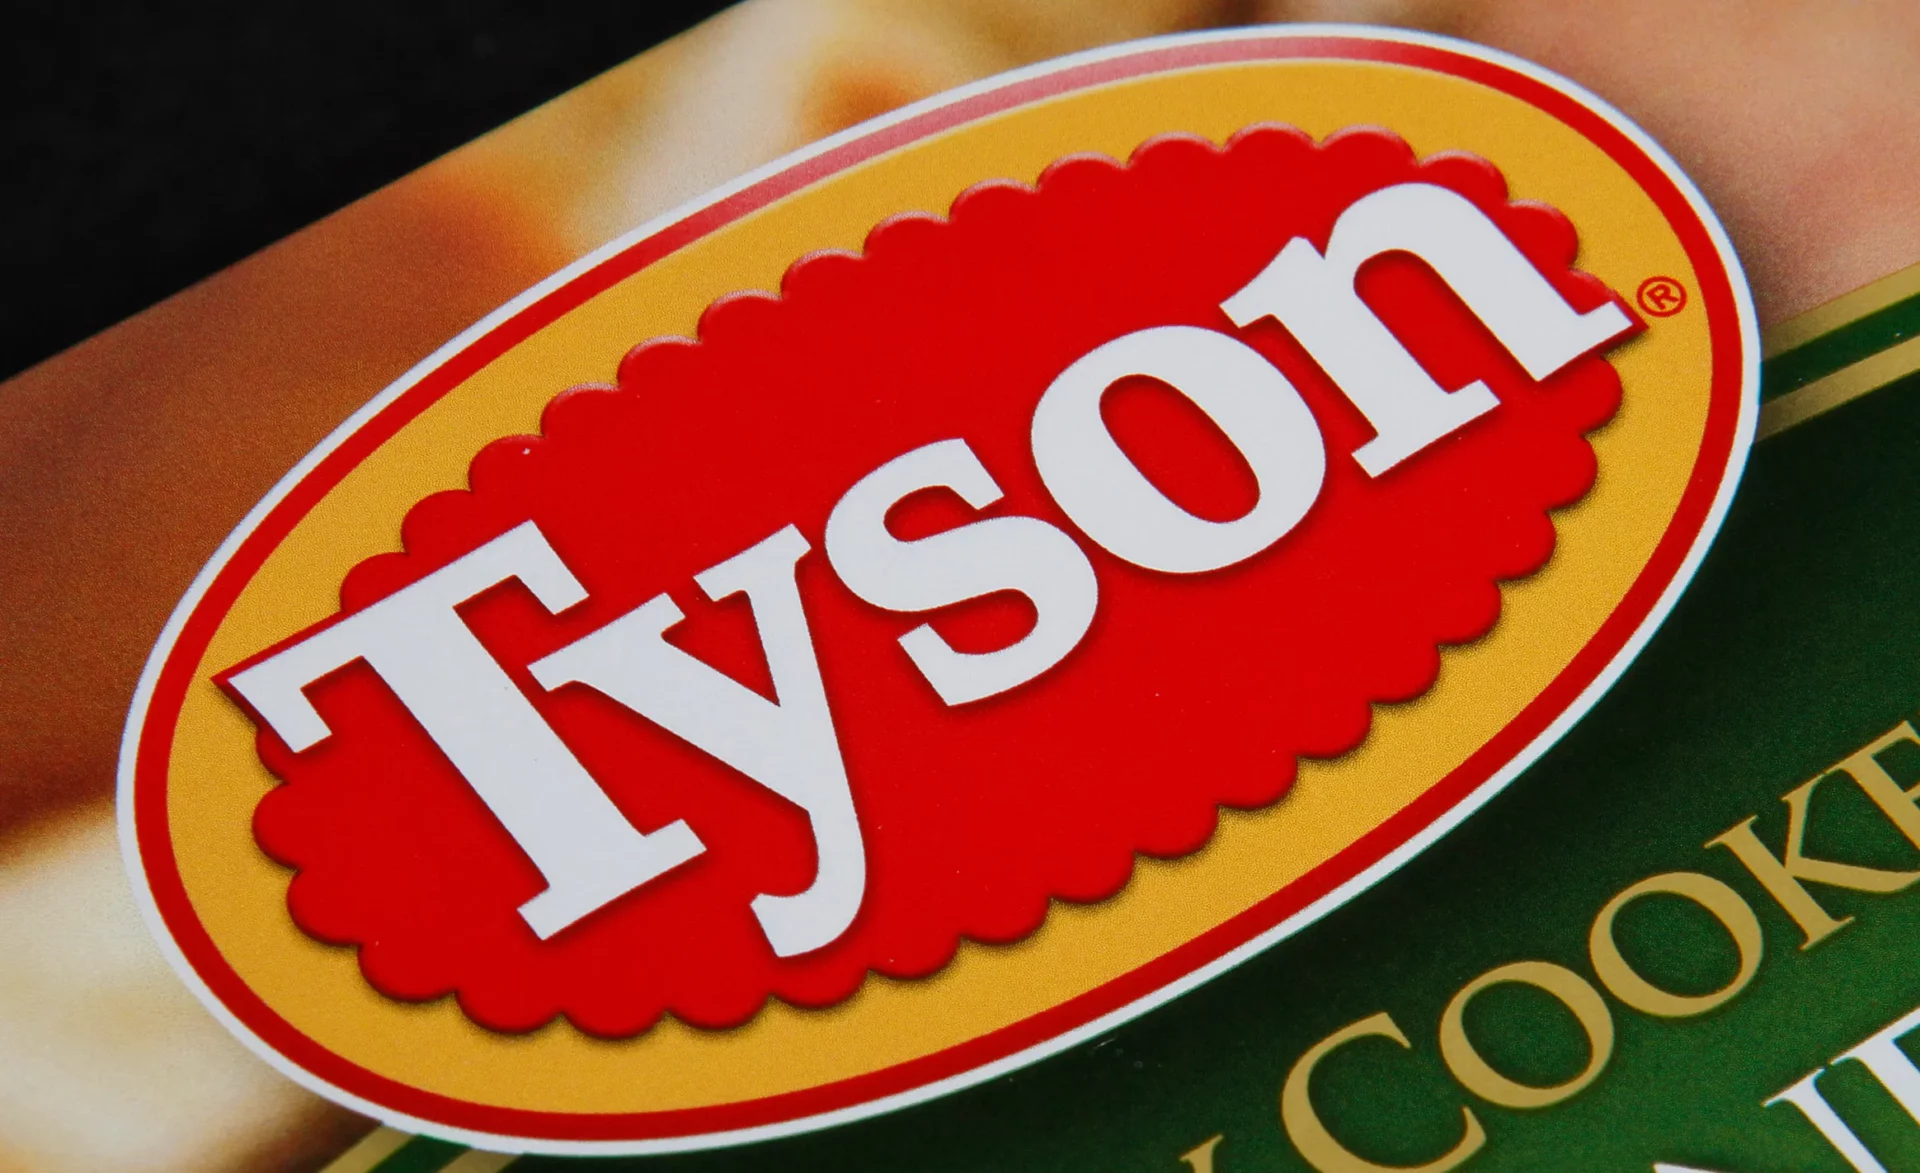 Tyson Foods’ River Pollution Investigation